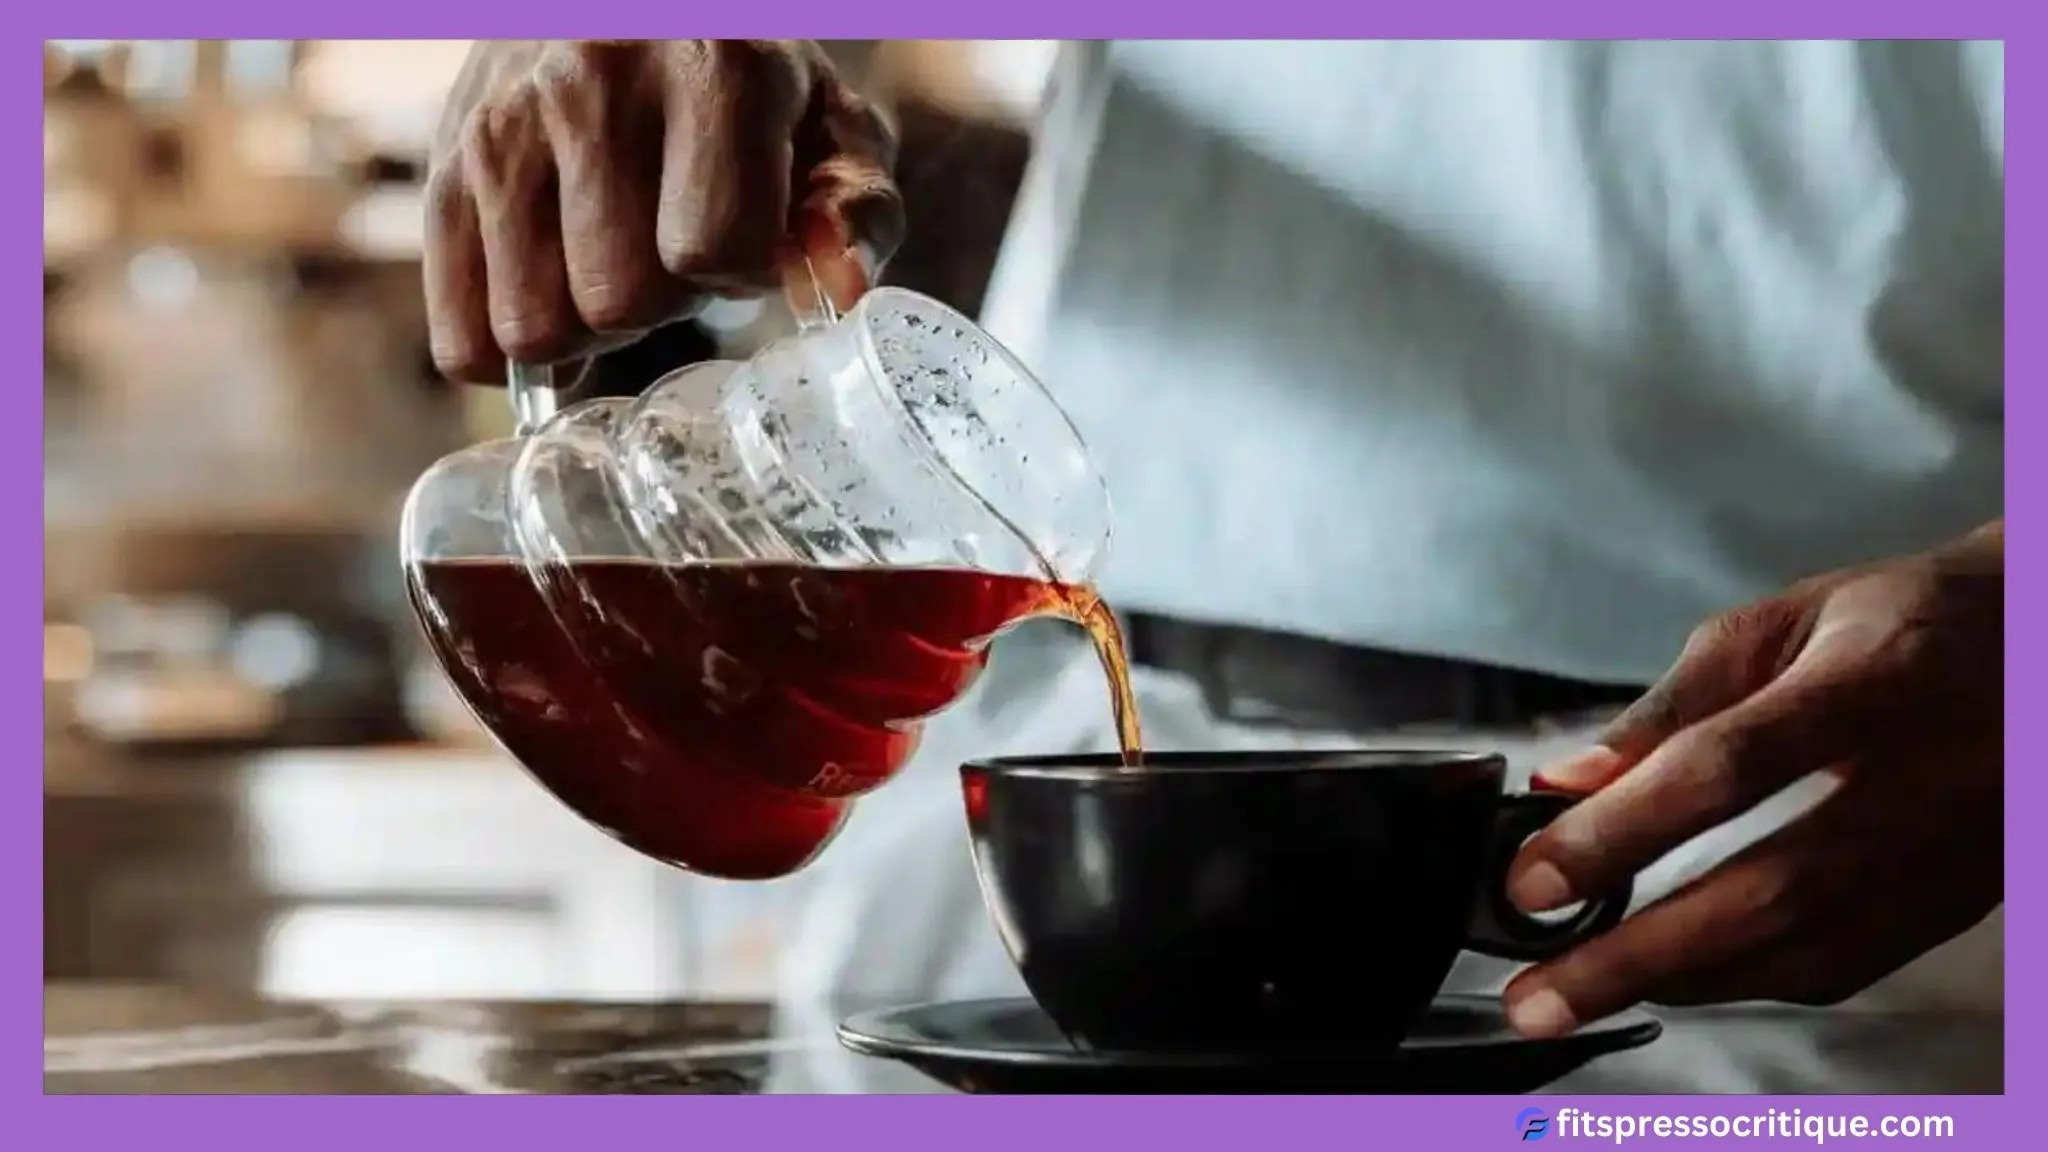 How To Prepare Black Coffee For Effective Weight Loss